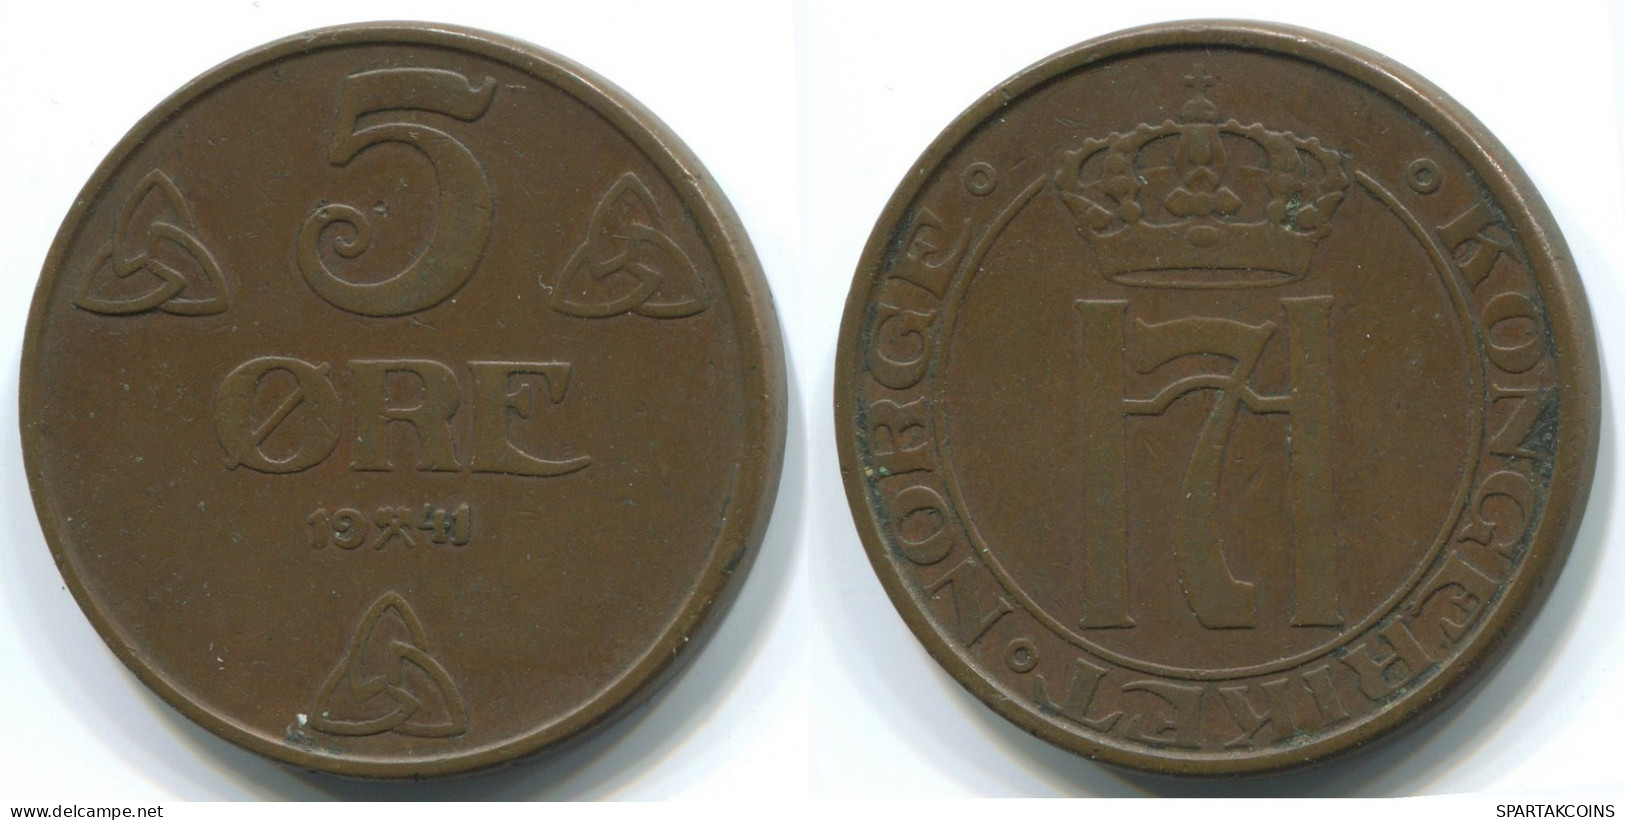 5 ORE 1941 NORWAY Coin #WW1036.U.A - Norway